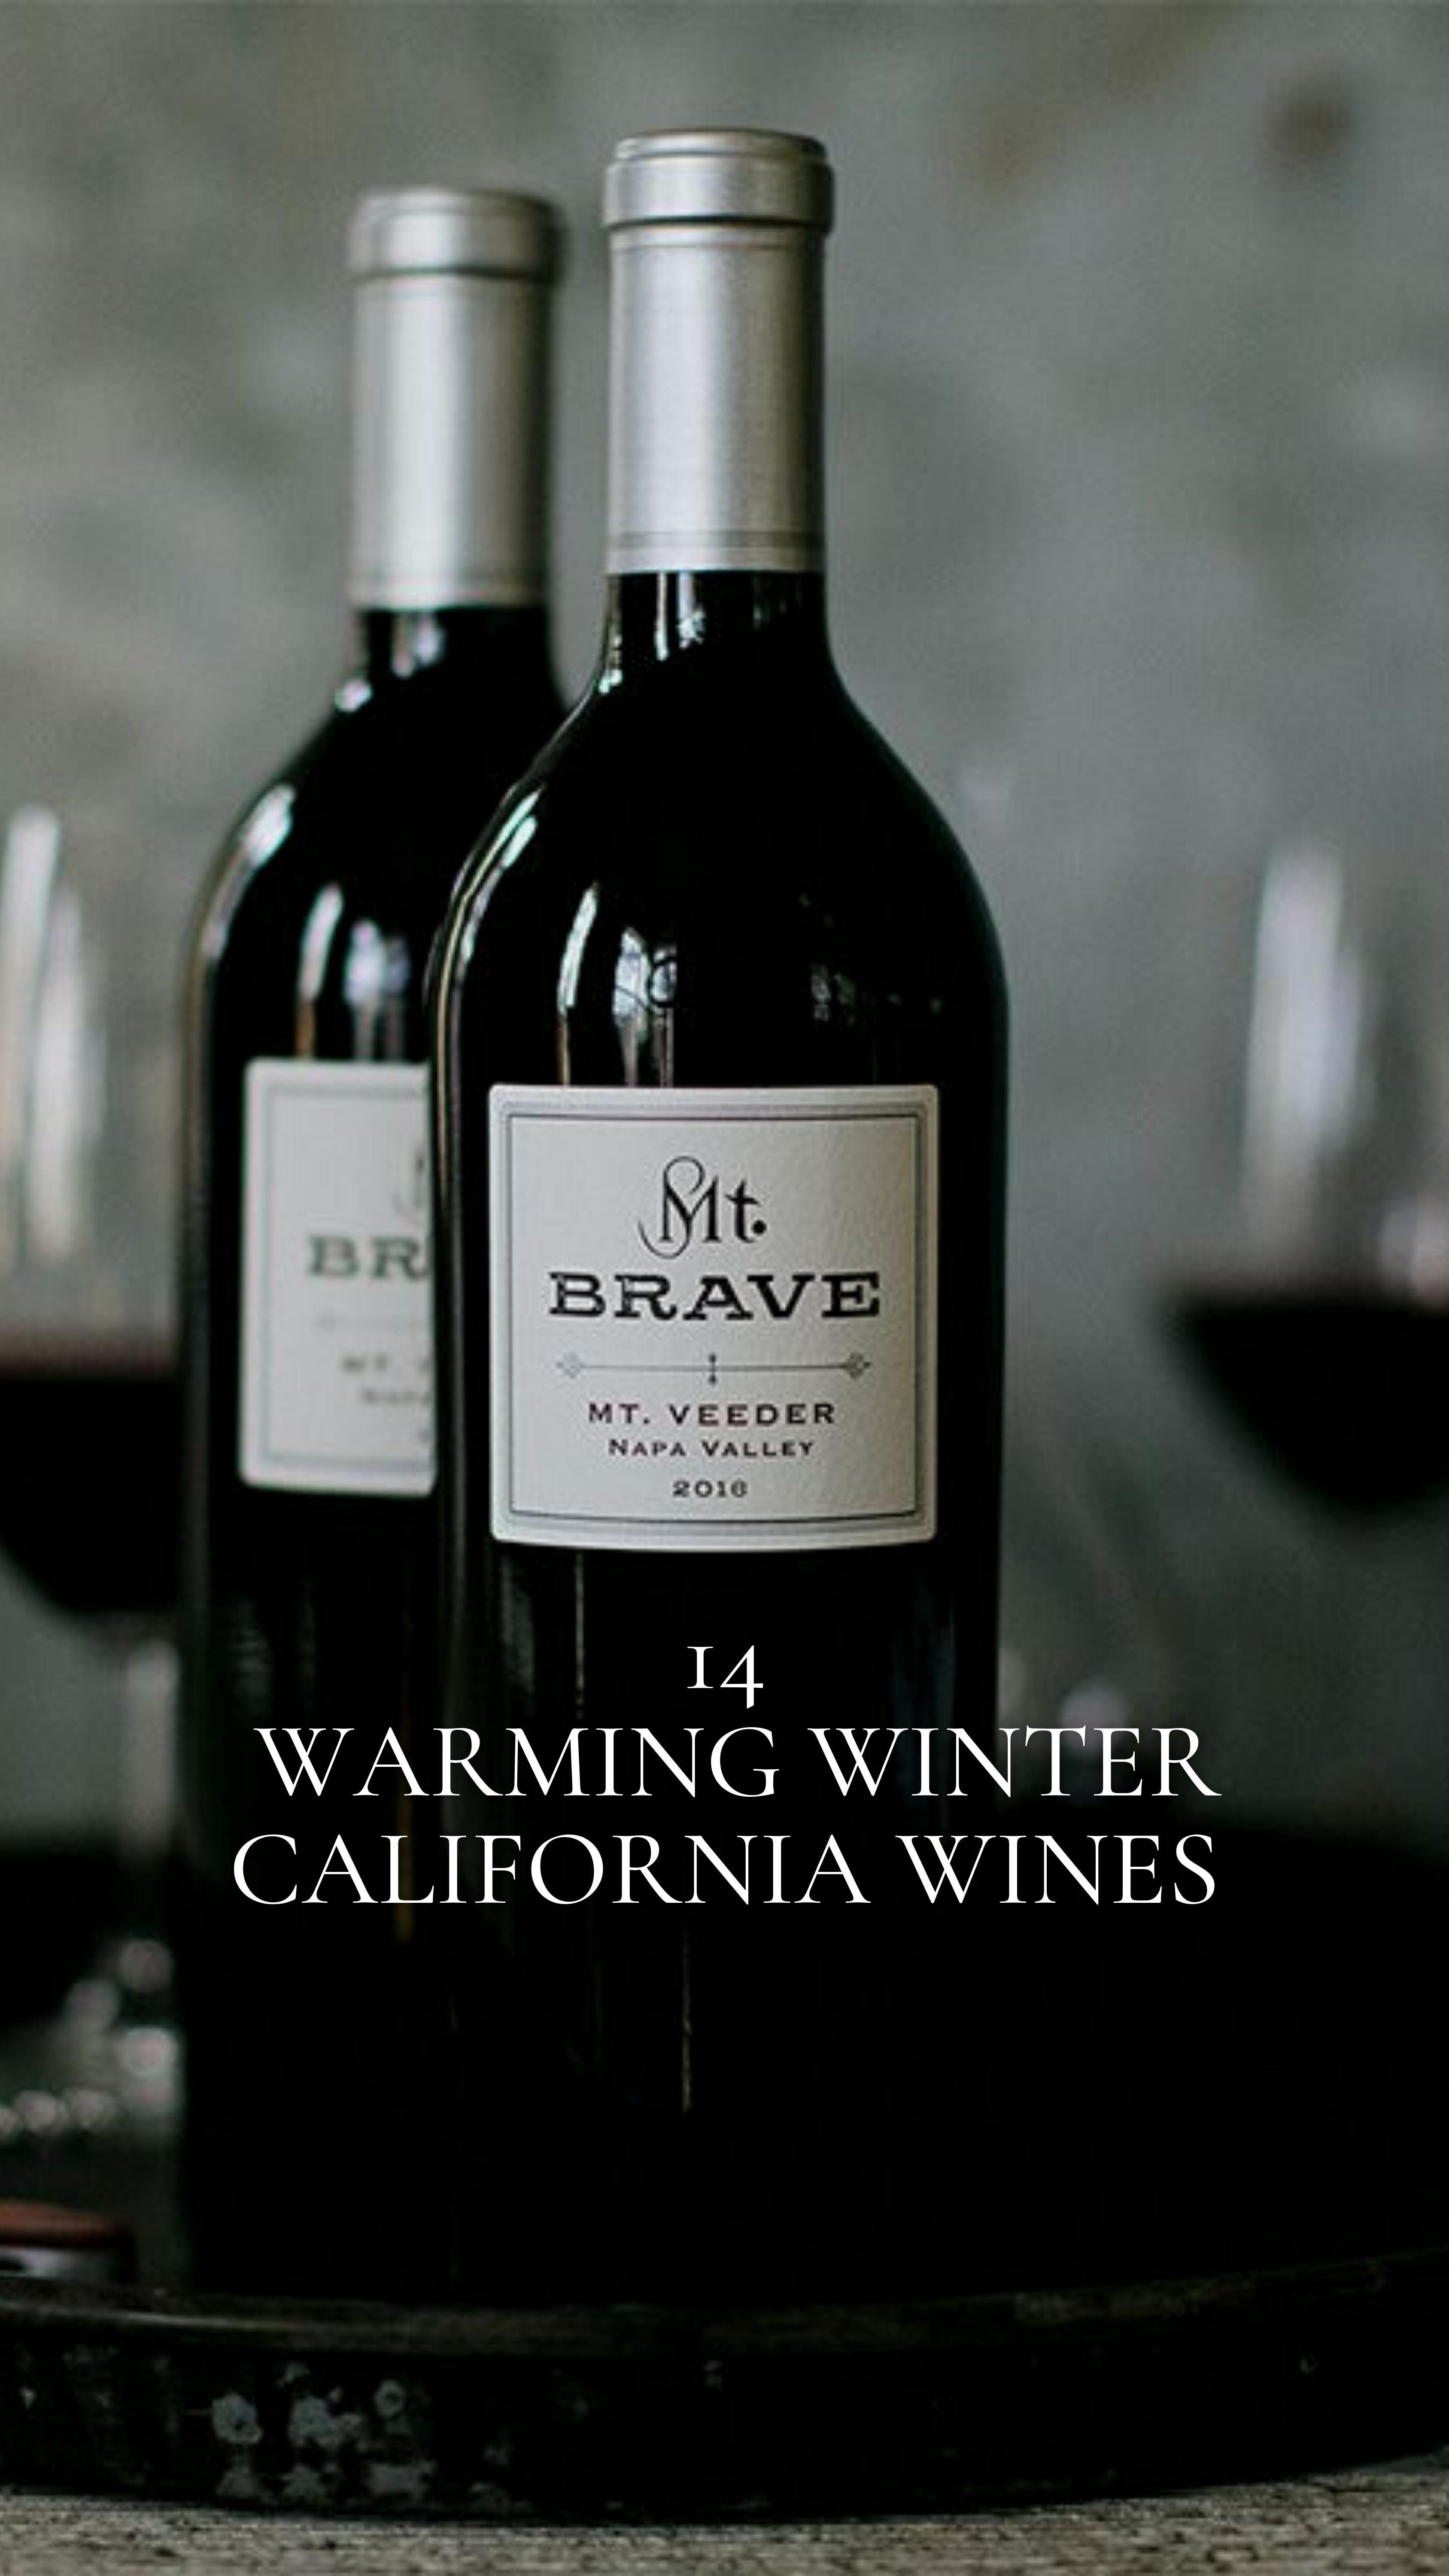 14 Warming Winter California Wines 🍷 Red wine is clearly the unofficial drink of cooler weather, and certainly the winter. These are some amazing California red wines to sip when temperatures start to dip. Click the link in our bio to read more!